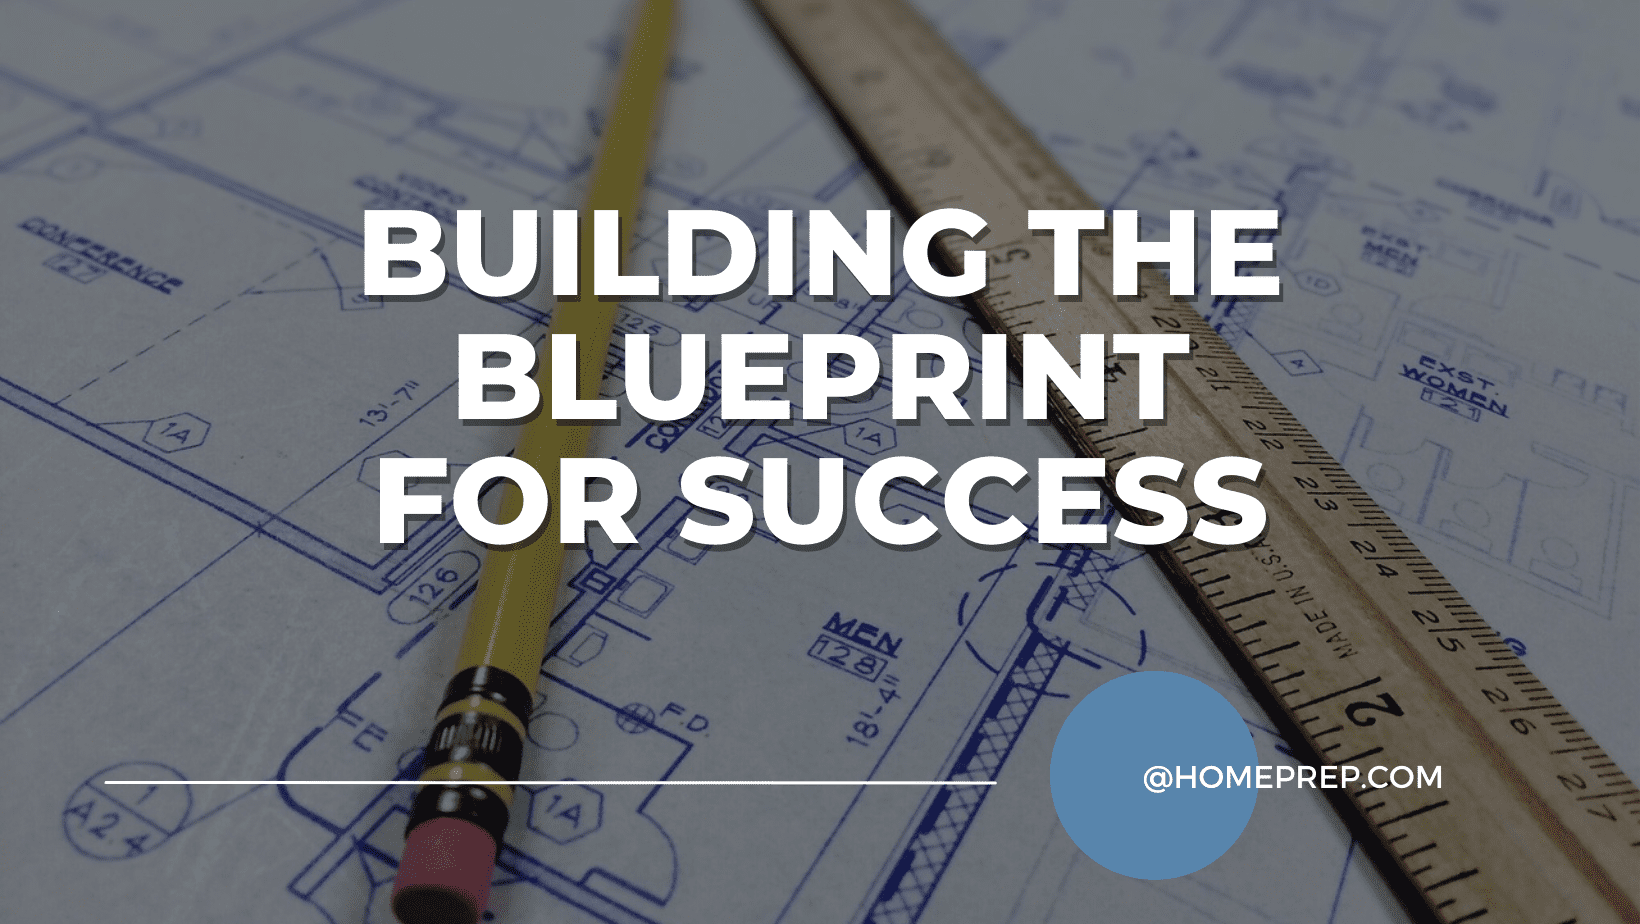 Building the Blueprint for Success: Construction Project Management with @HomePrep